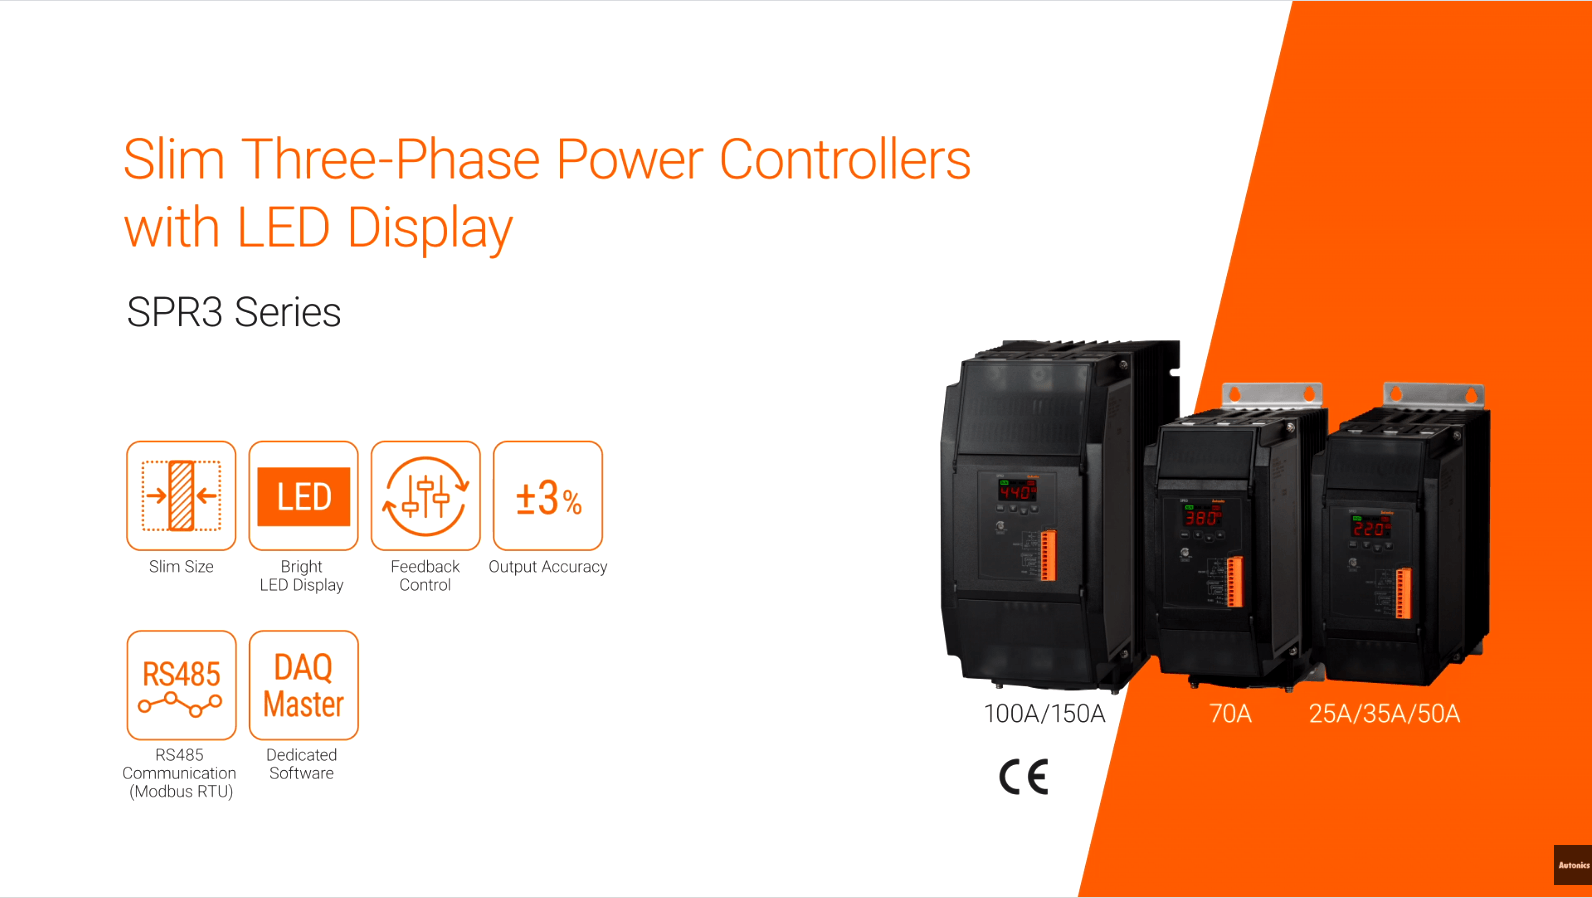 Slim Three-Phase Power Controllers with LED Display SPR3 Series